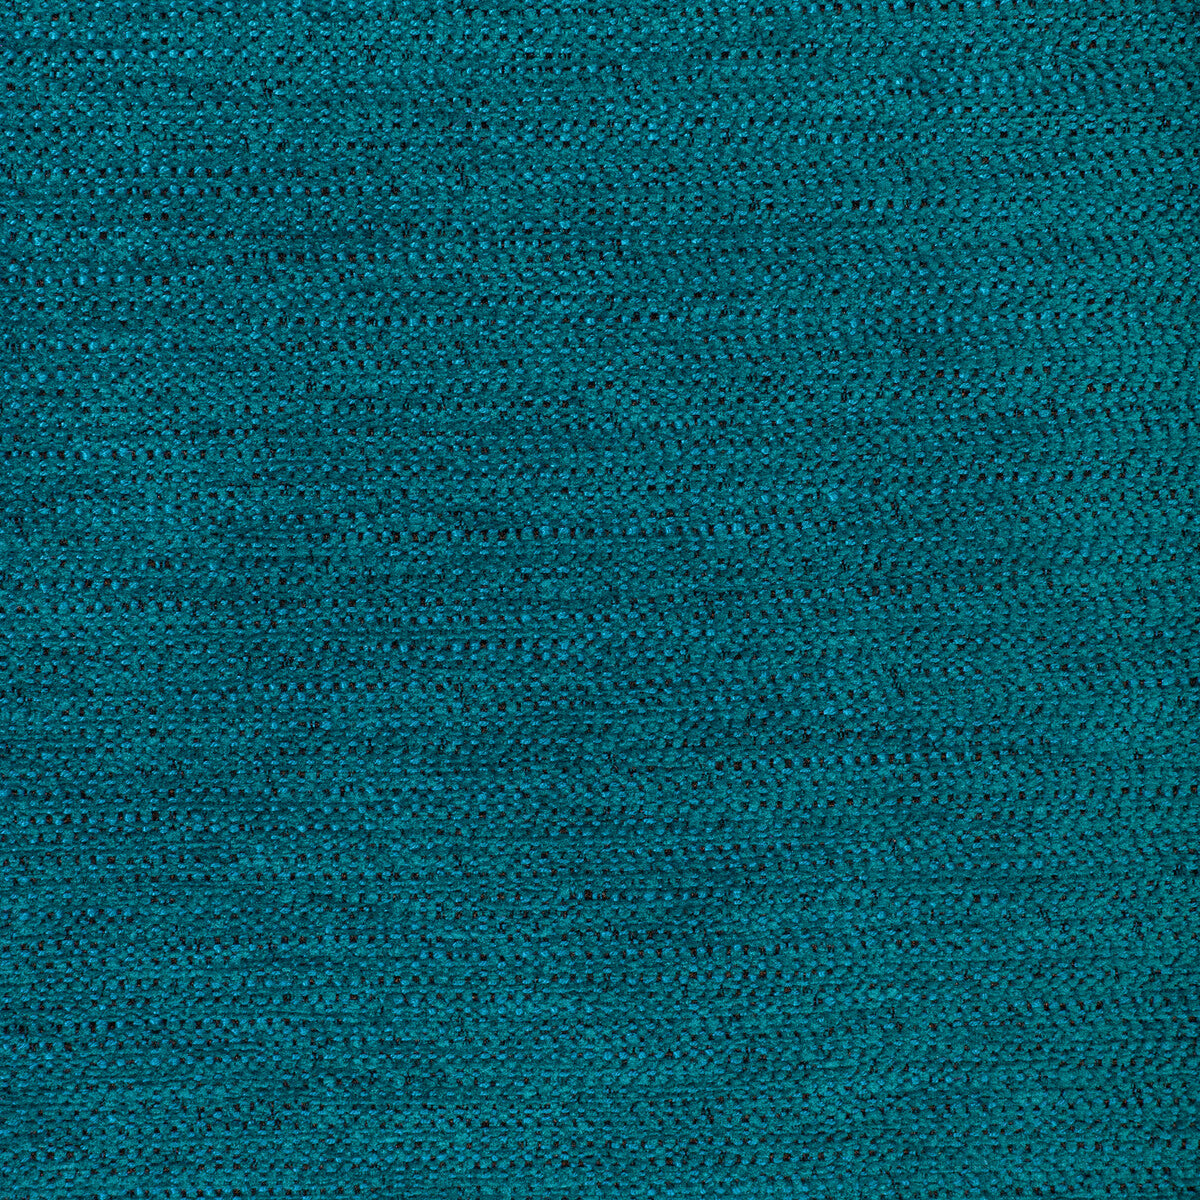 Recoup fabric in reef color - pattern 36569.35.0 - by Kravet Contract in the Seaqual collection